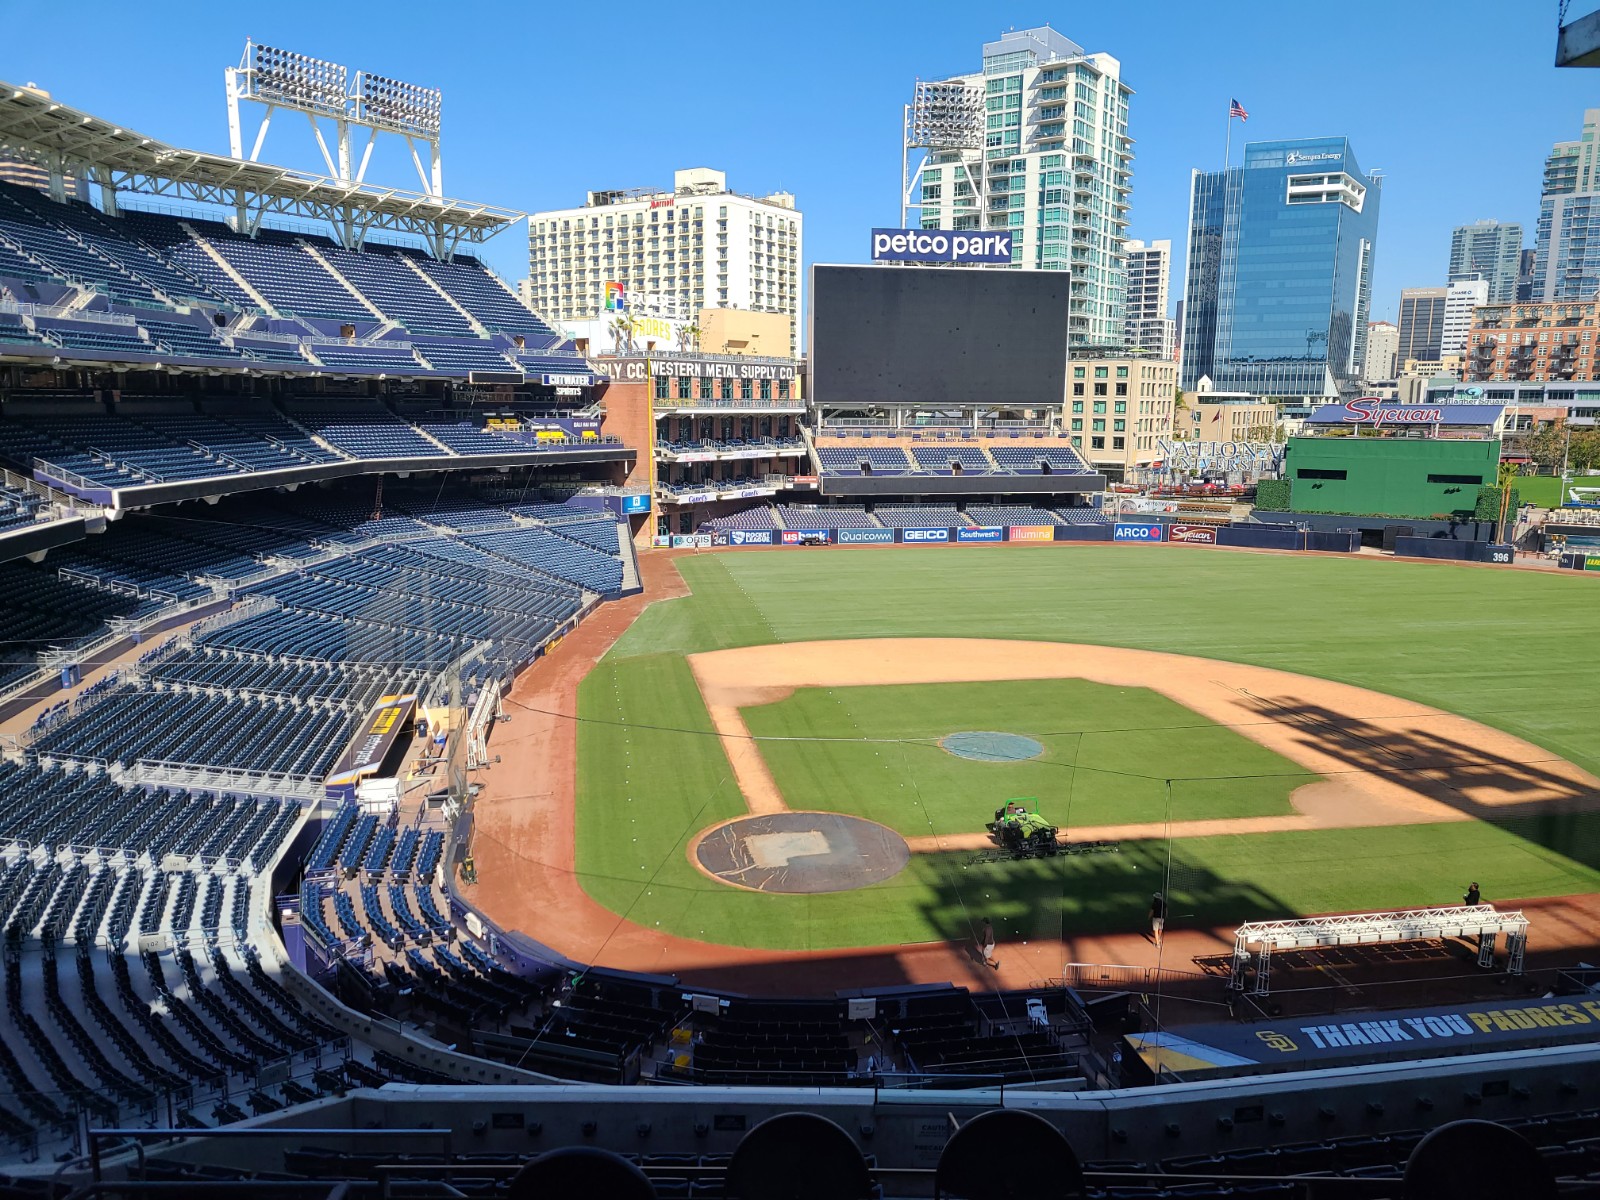 View of Petco Park field from Pressbox